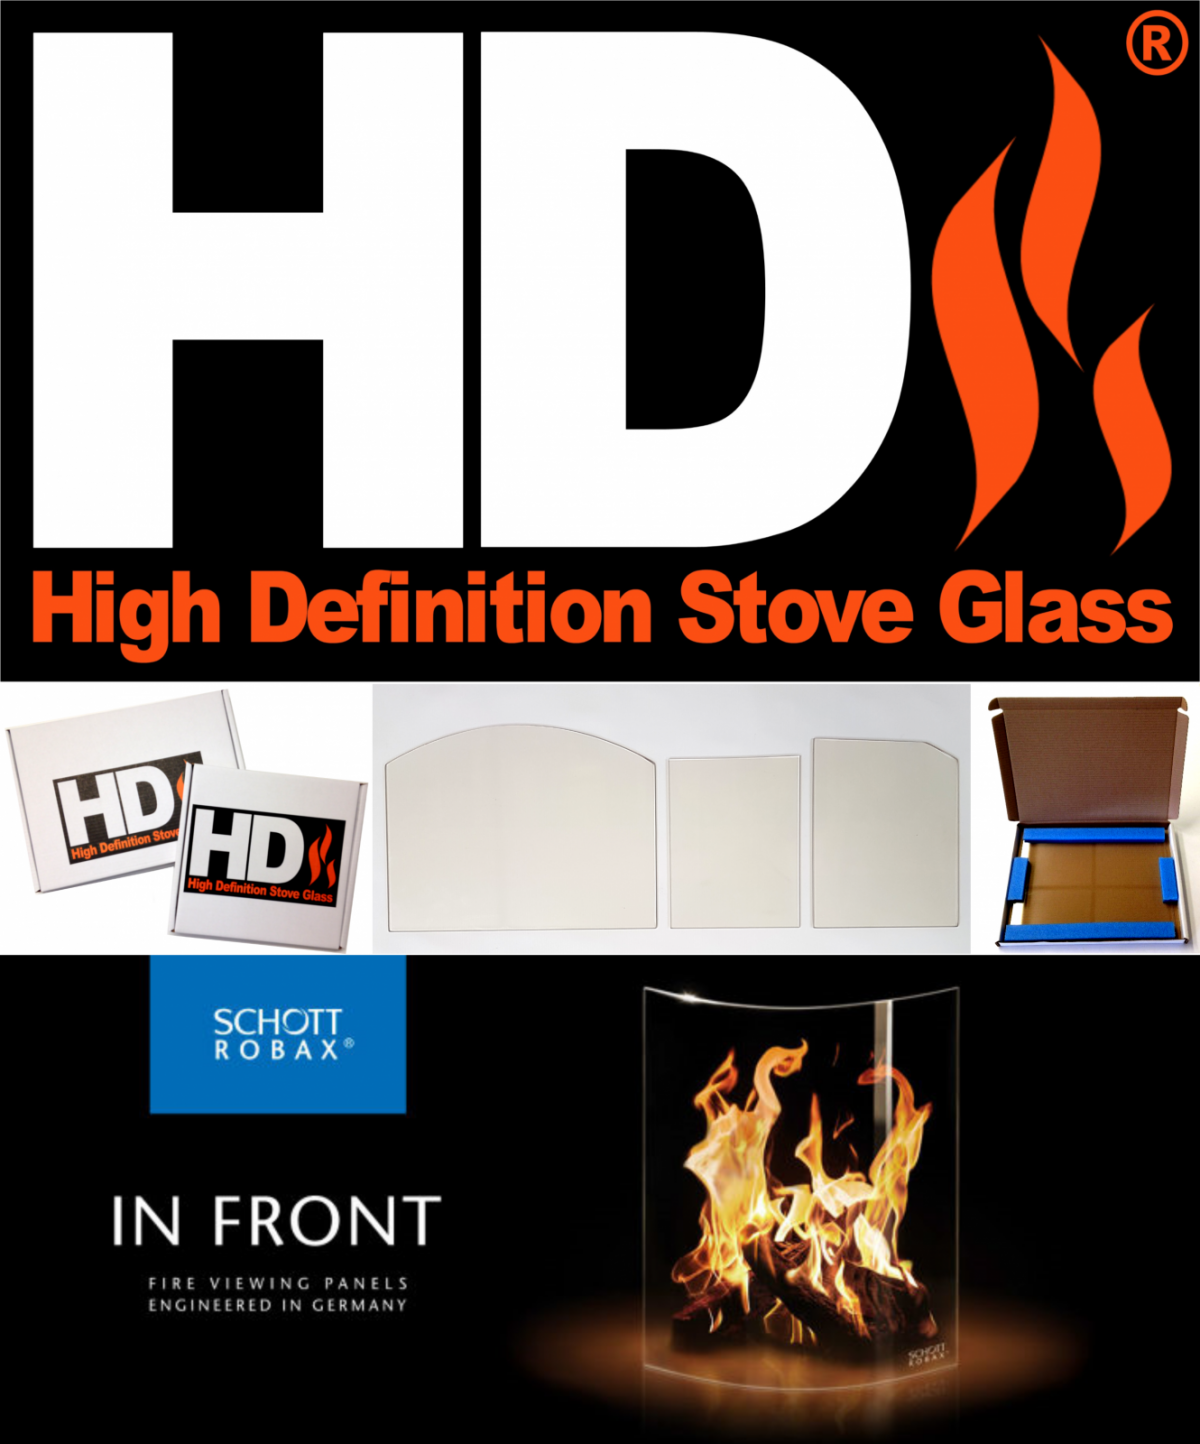 High Definition Stove Glass for the Aga/Coalbrookdale Little Wenlock MK 3